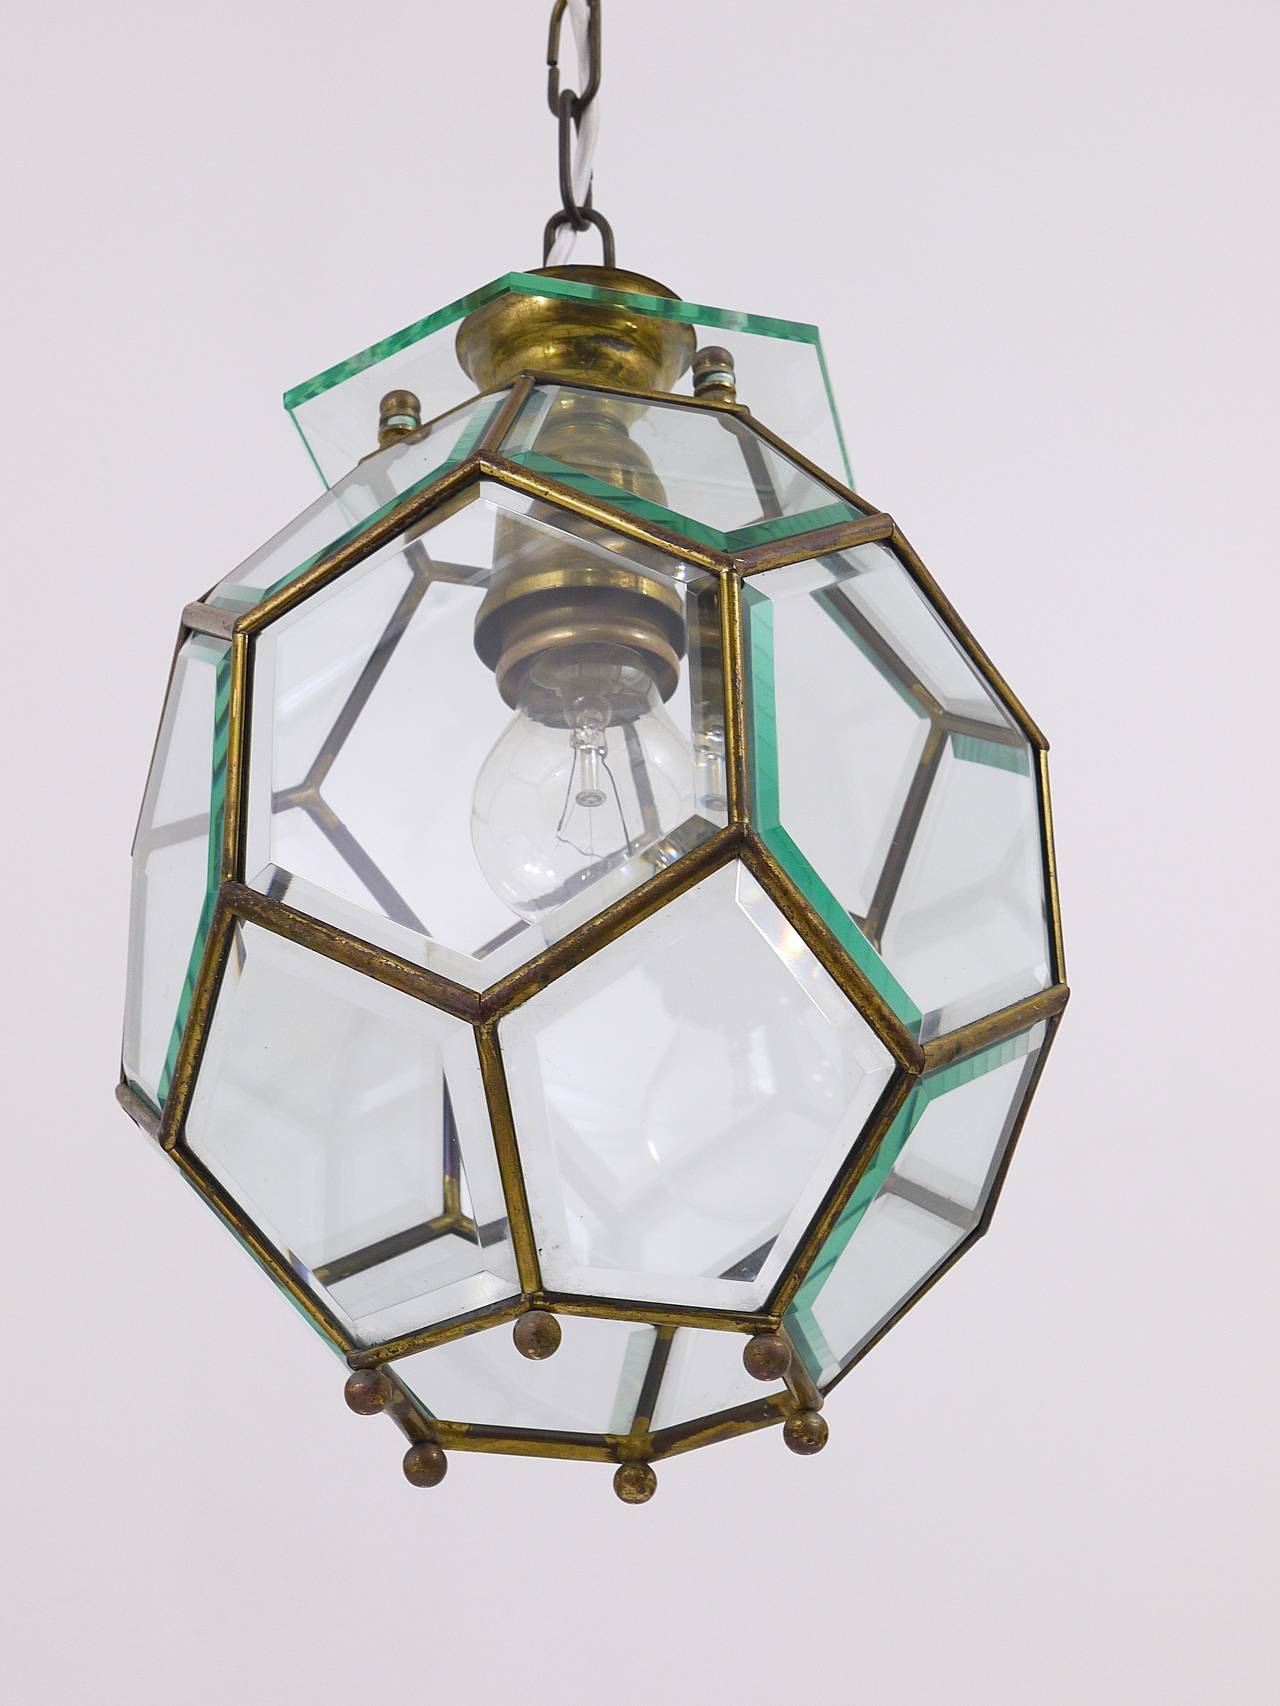 A very beautiful Austrian Secessionist movement pendant lamp, dated around 1900, in the manner of Adolf Loos. Made of brass and pentagonal facetted glass. In very good condition with nice patina on the brass. A very unique